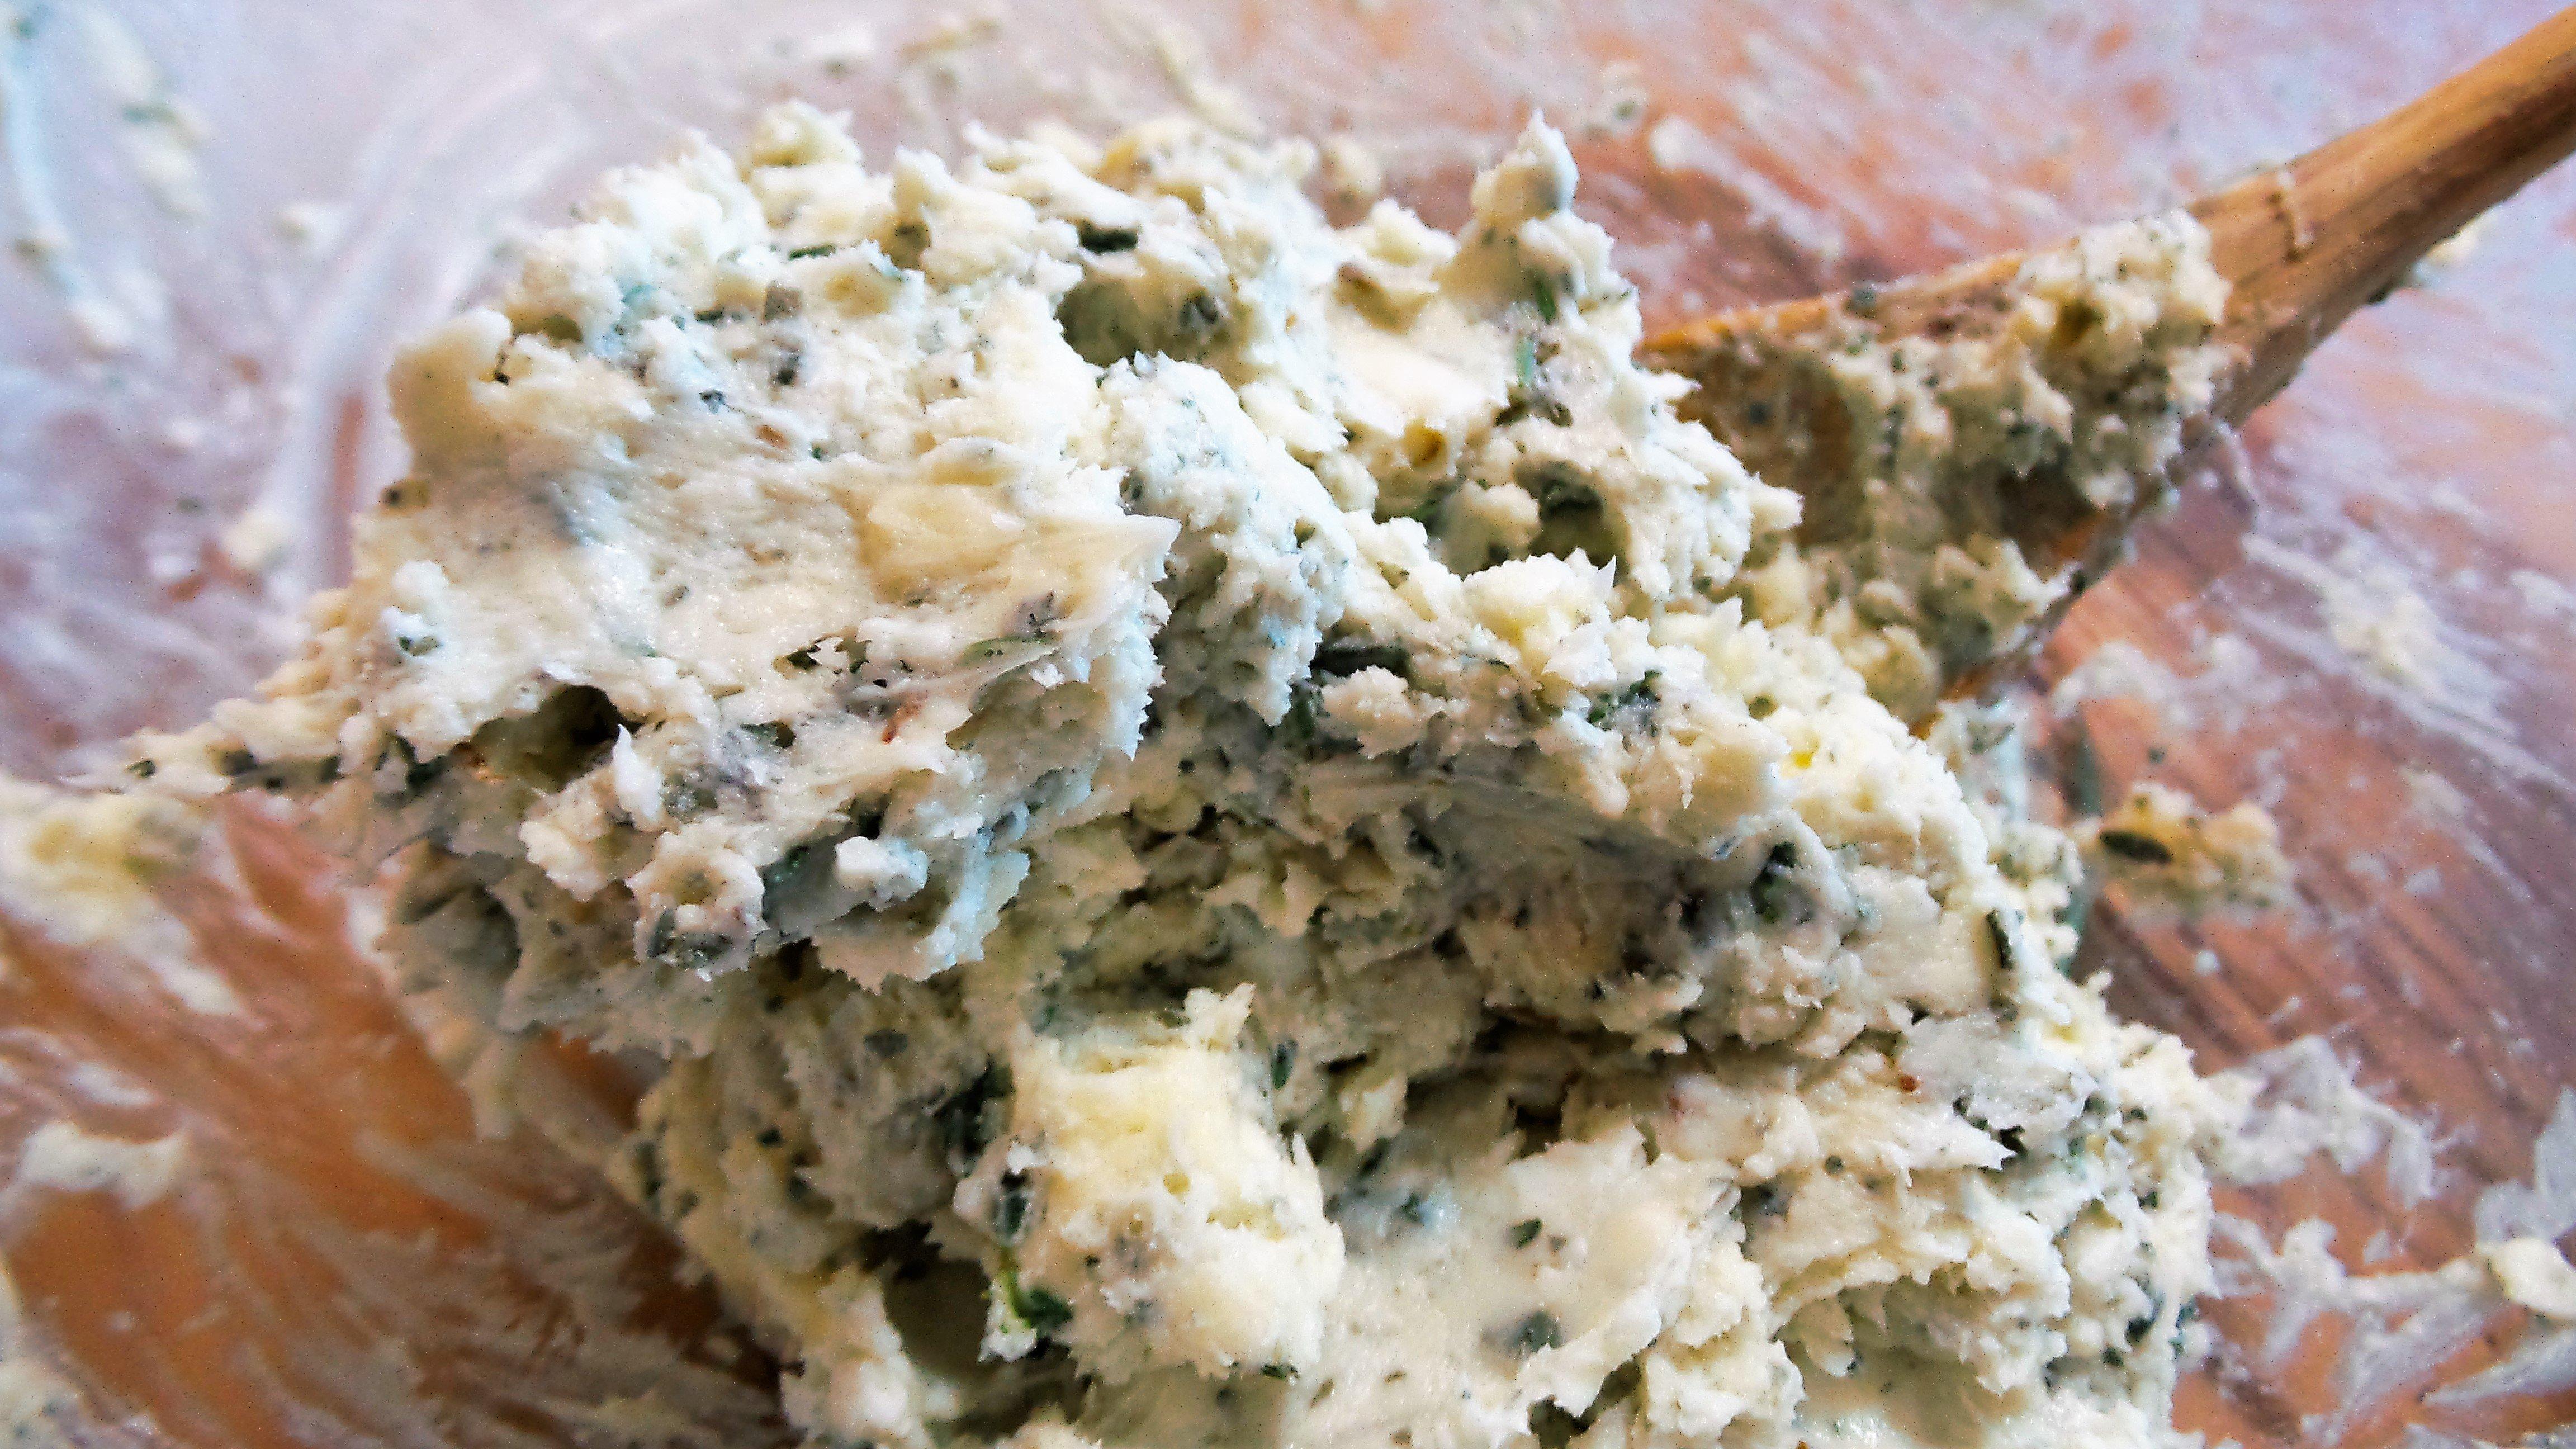 Mix the butter, cheese and thyme.